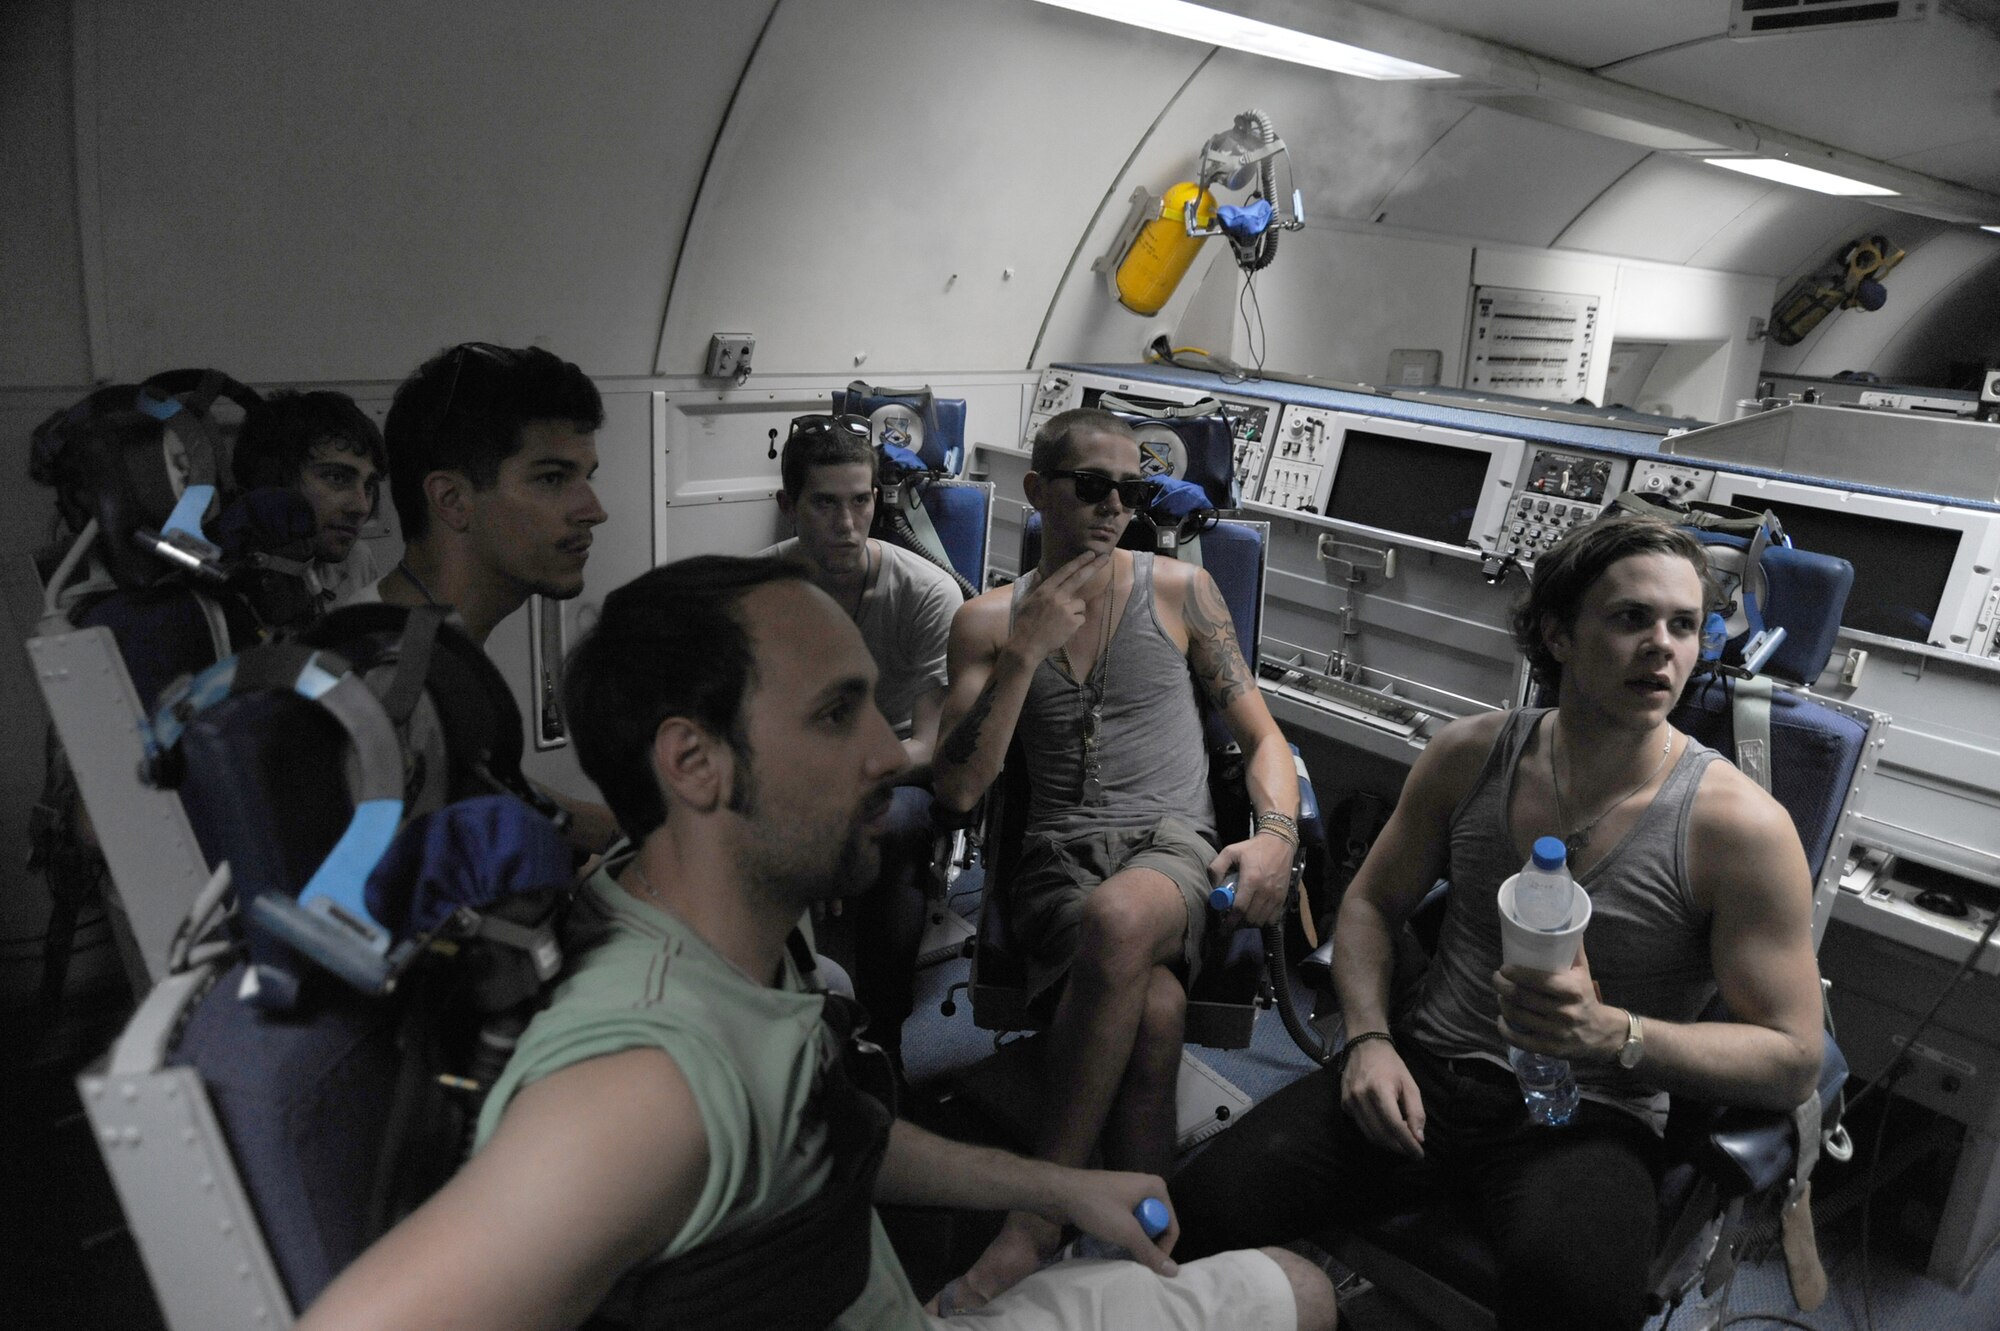 SOUTHWEST ASIA - Members of the band "Elevation" are briefed on the airborne warning and control systems (AWACS) mission aboard an E-3 Sentry at the 380th Air Expeditionary Wing, July 10 in Southwest Asia. The band was able to tour the 380th AEW and learn about the wing's mission before their performance. The band performed at several locations throughout Southwest Asia as part of an Armed Forces Entertainment tour. (U.S. Air Force photo by Senior Airman Brian J. Ellis)